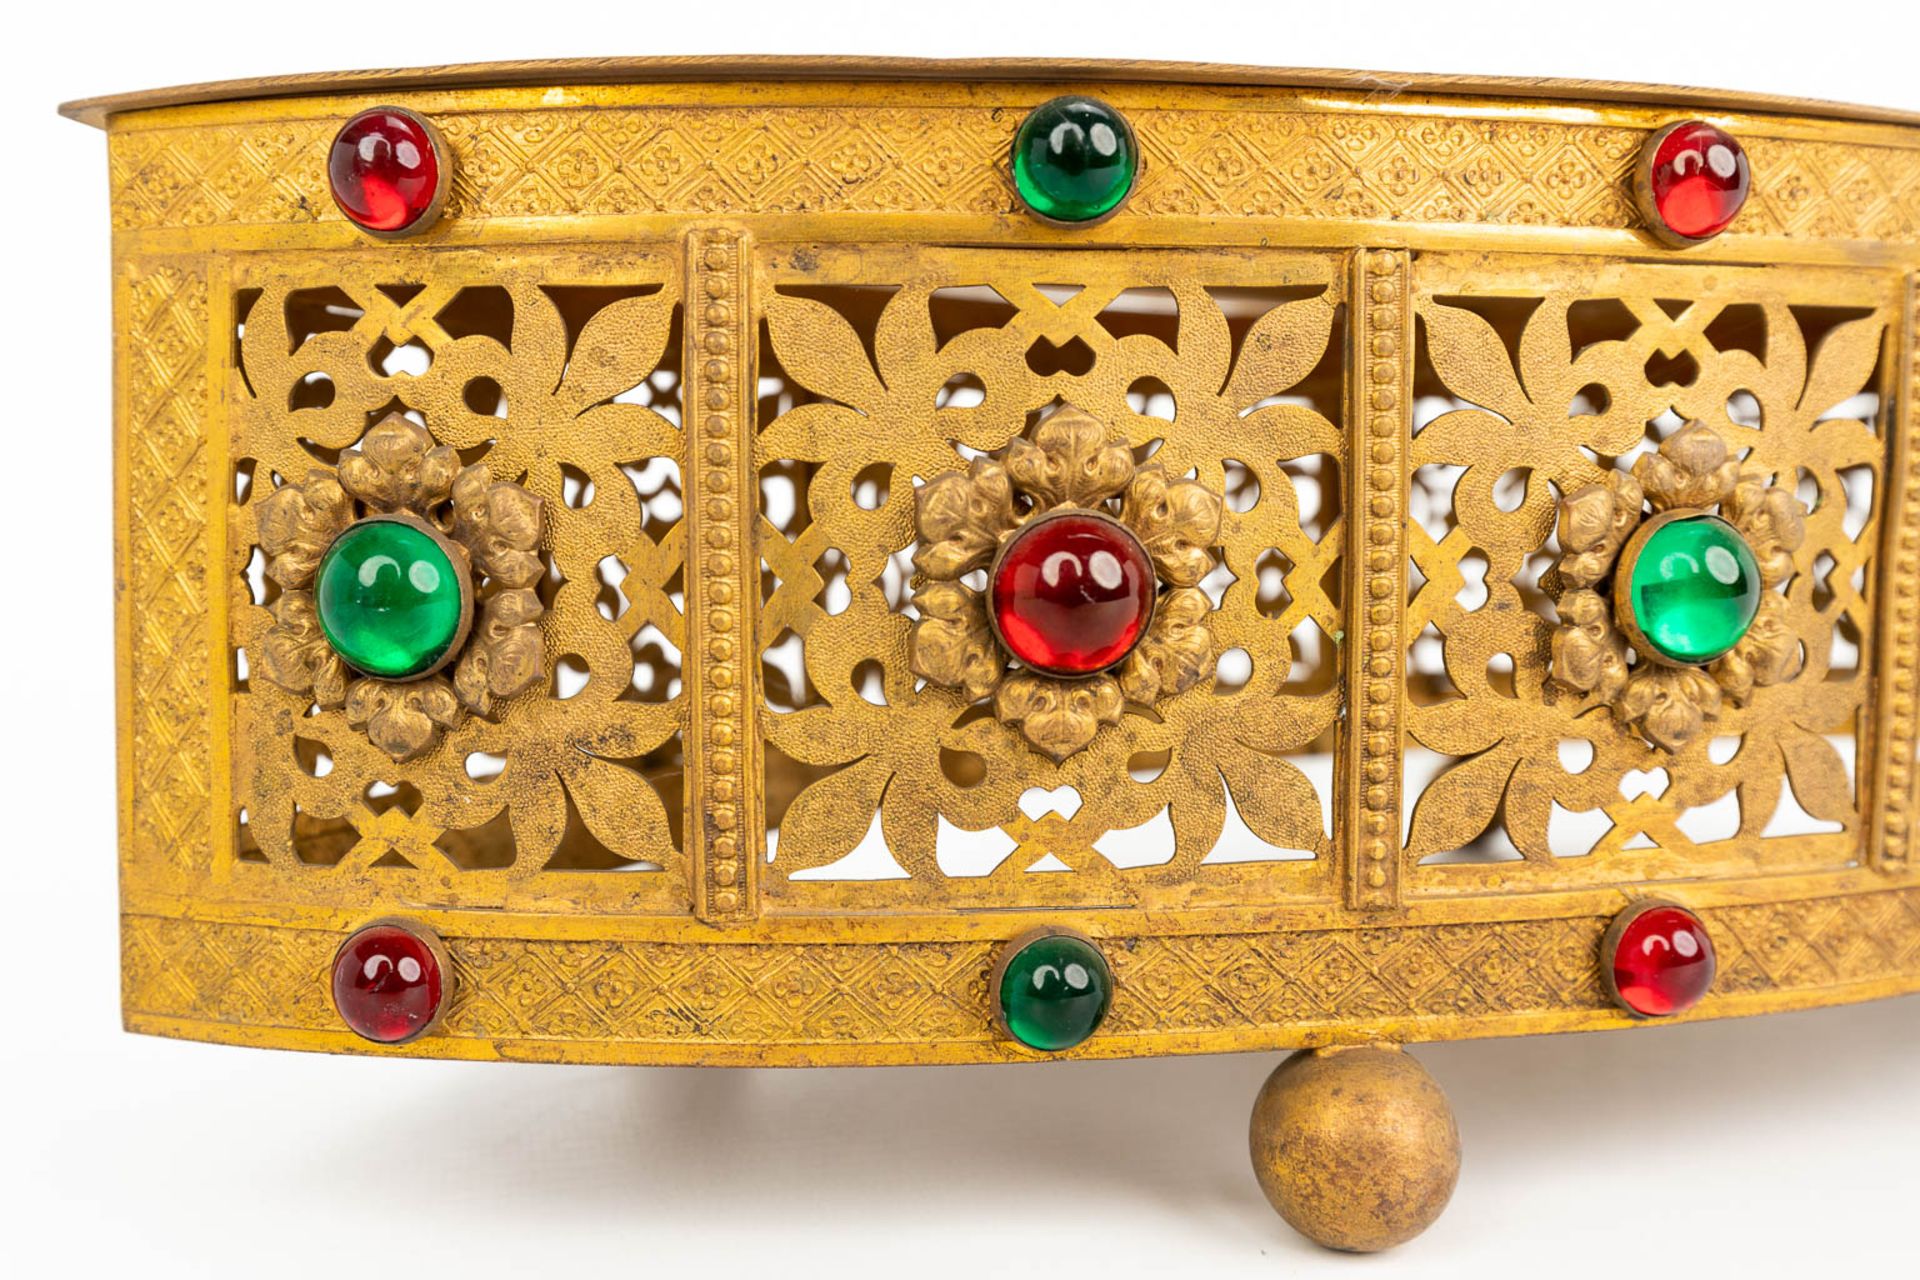 A neogothic base made of brass and decorated with cloisonné enamel and cabochons. (H:11cm) - Image 10 of 11